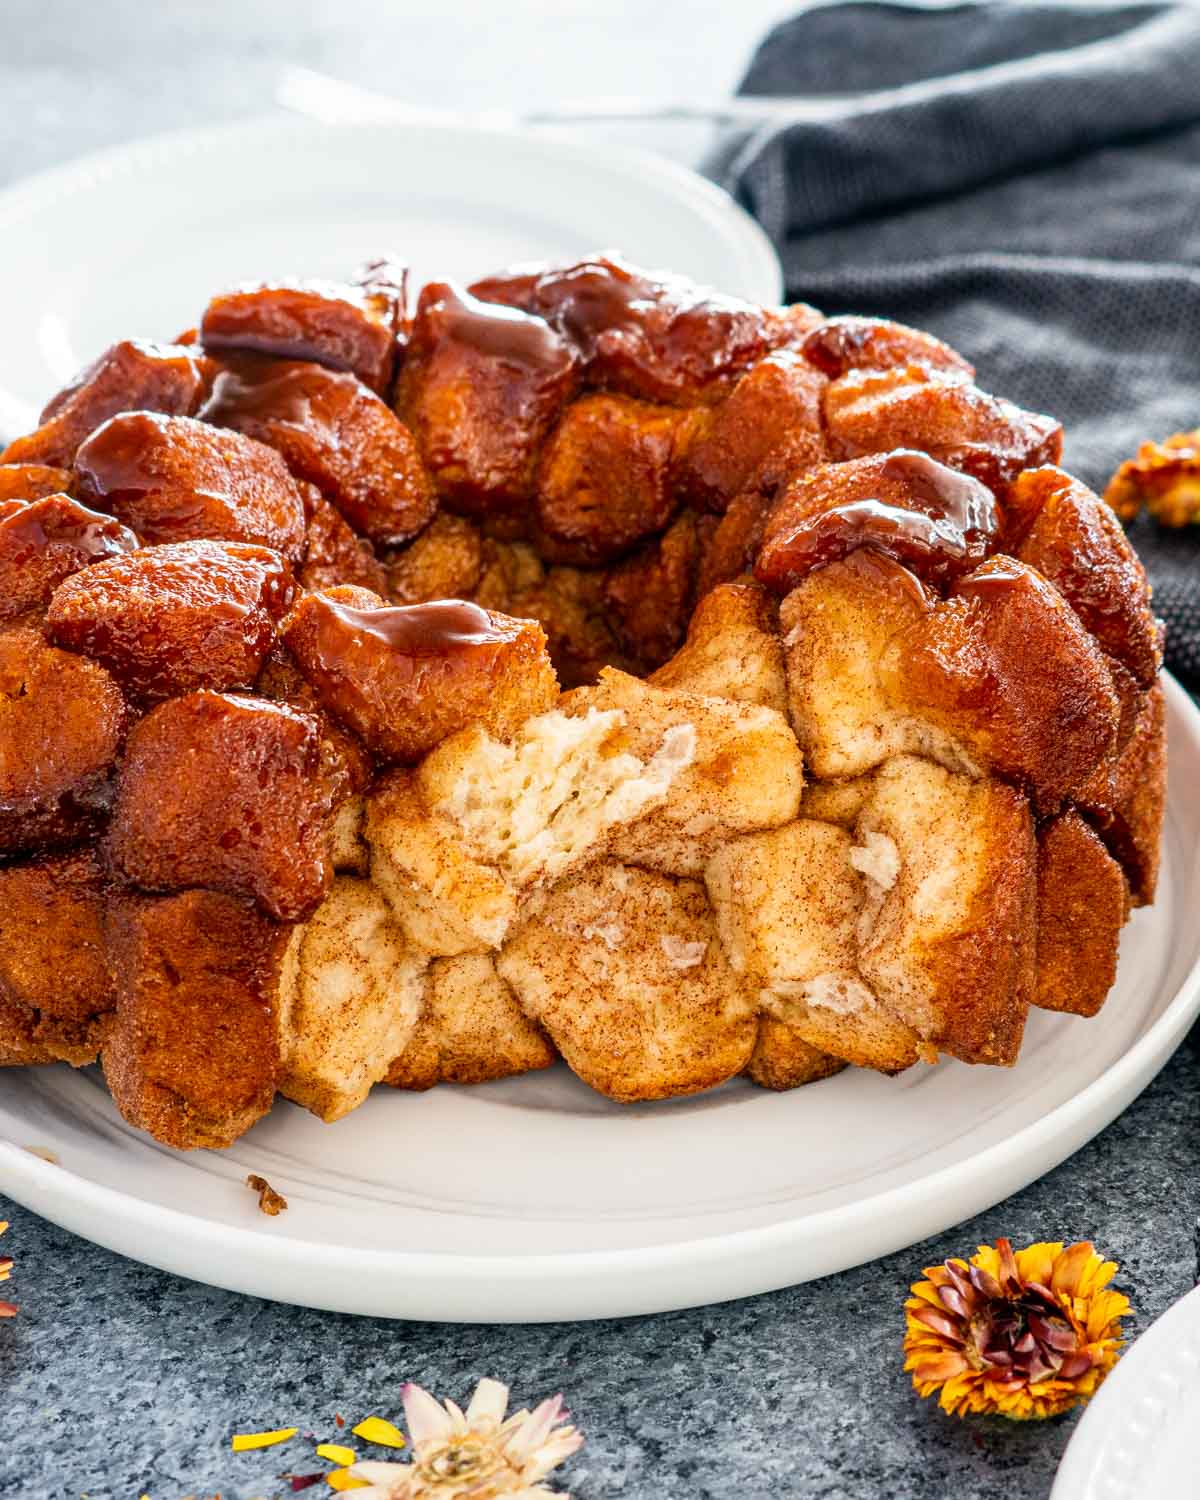 monkey bread with some pieces taken out on a white serving platter.